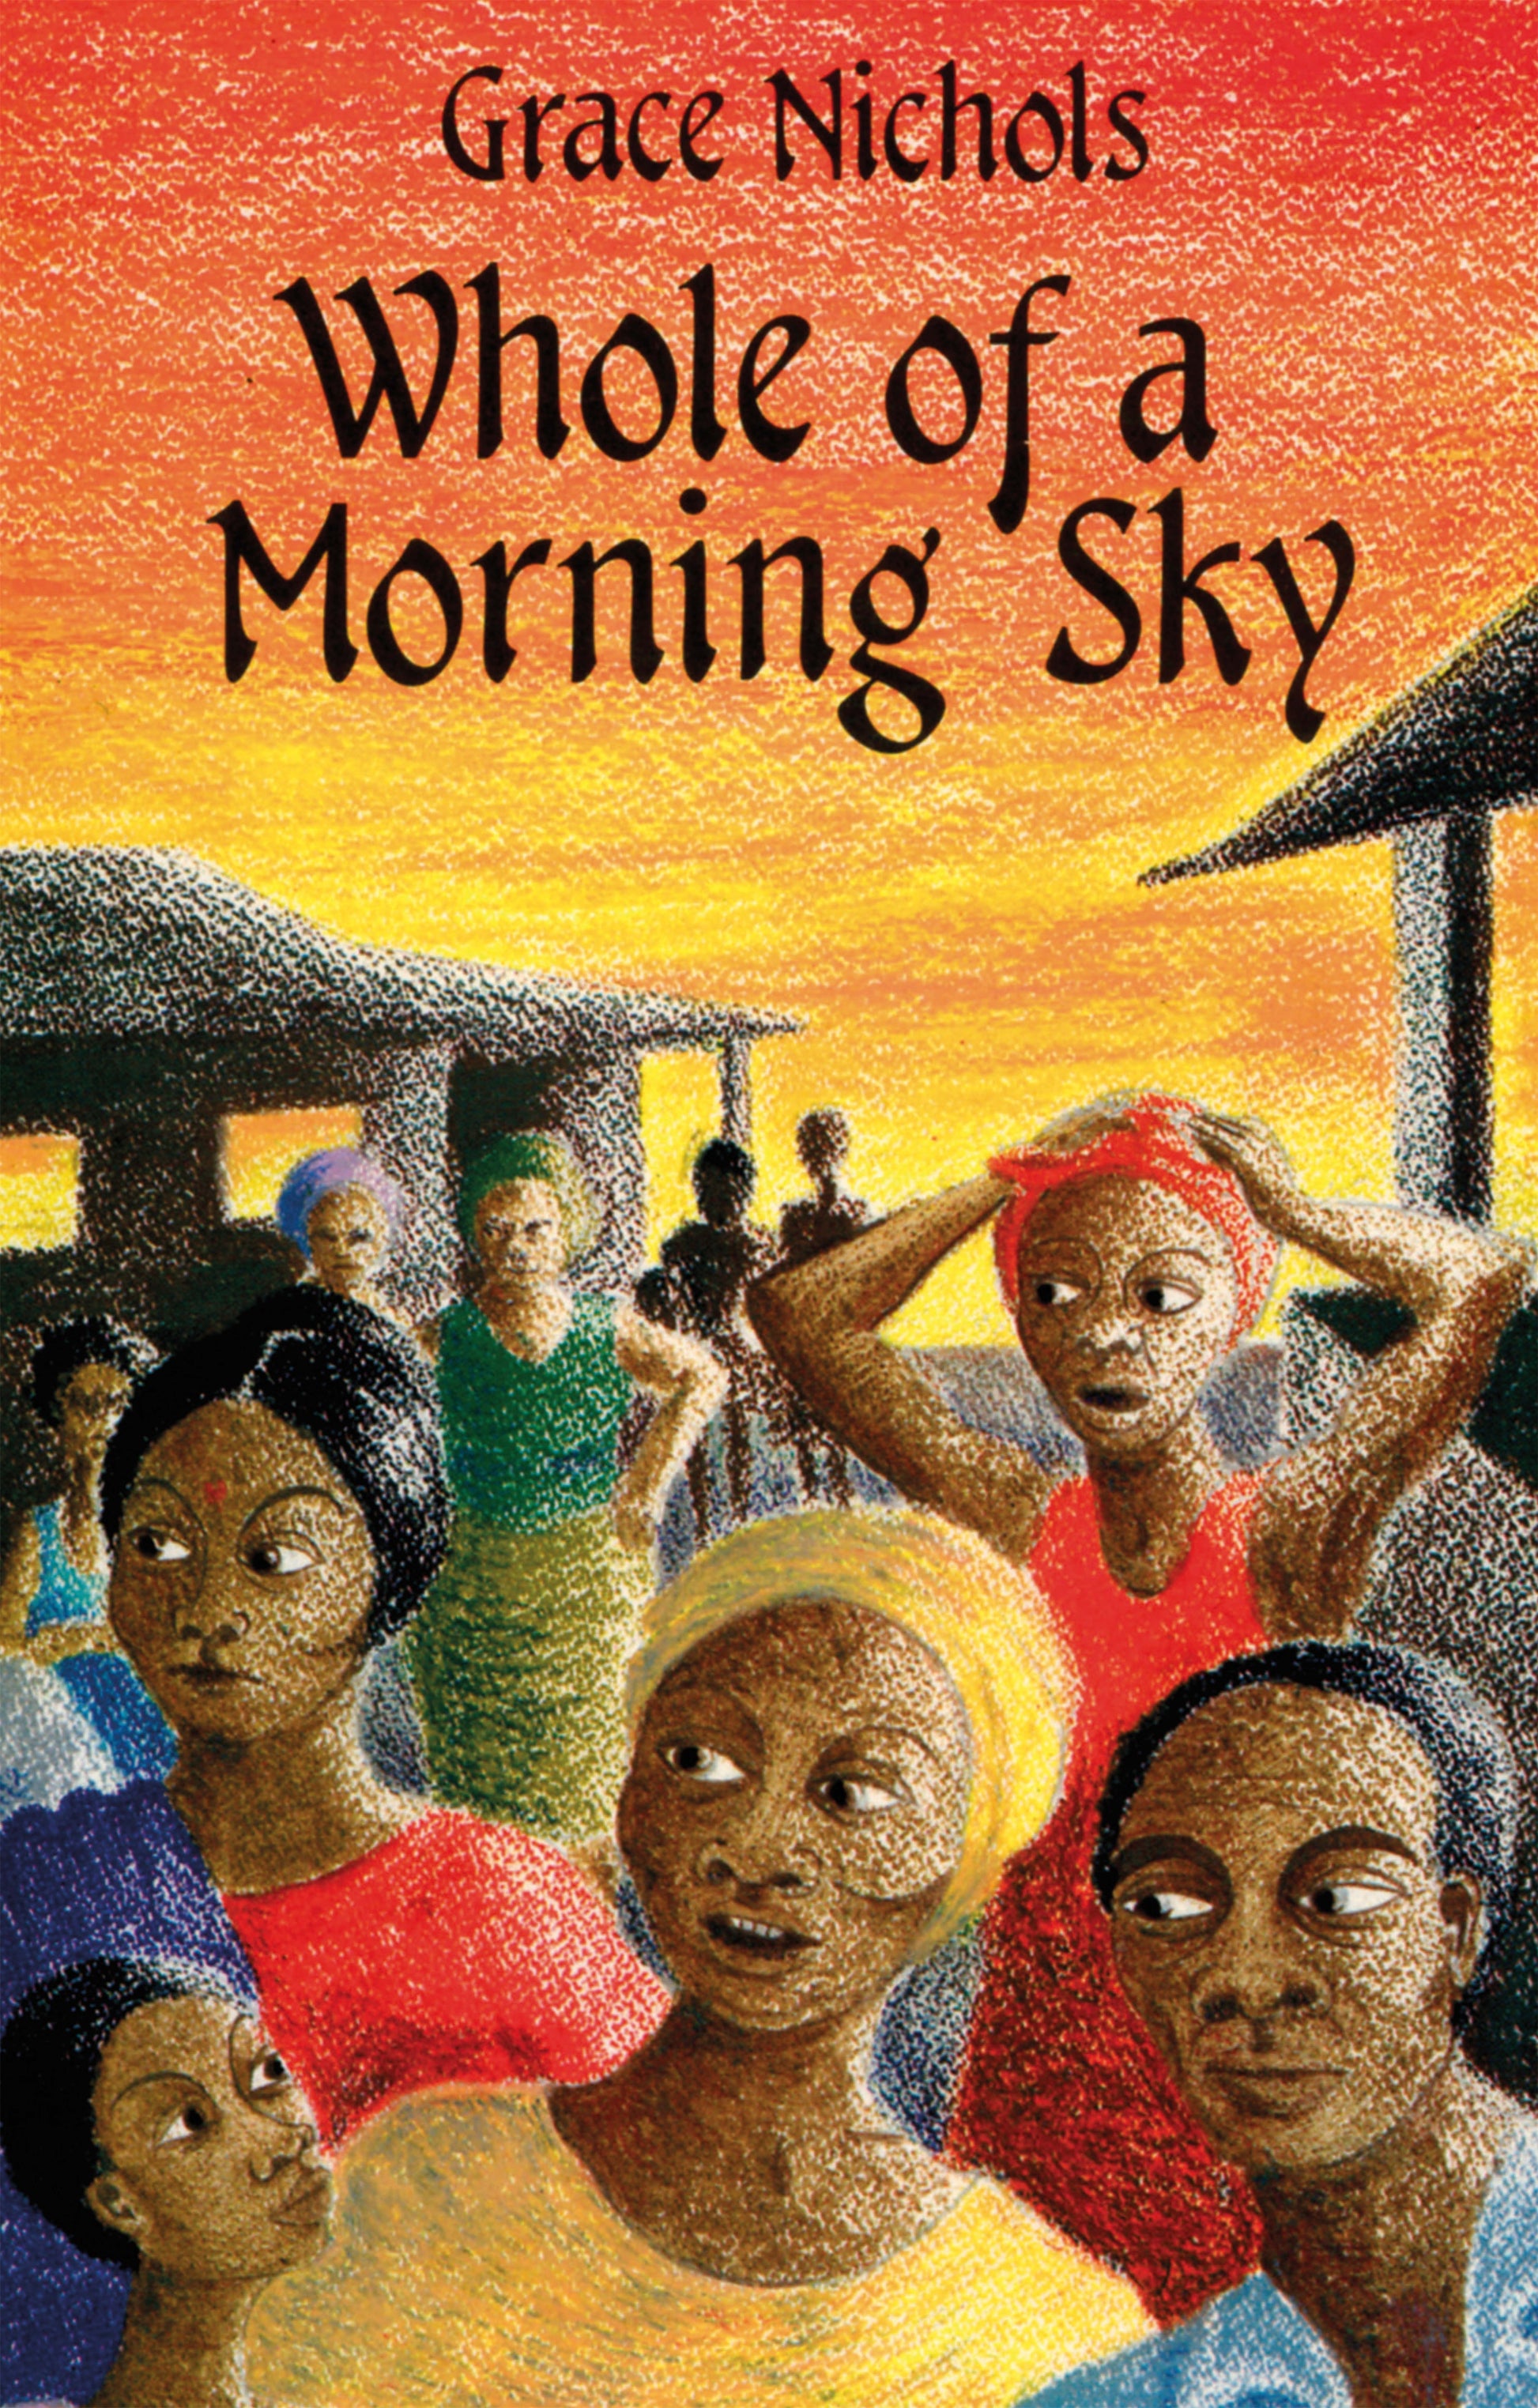 Whole Of A Morning Sky by Grace Nichols